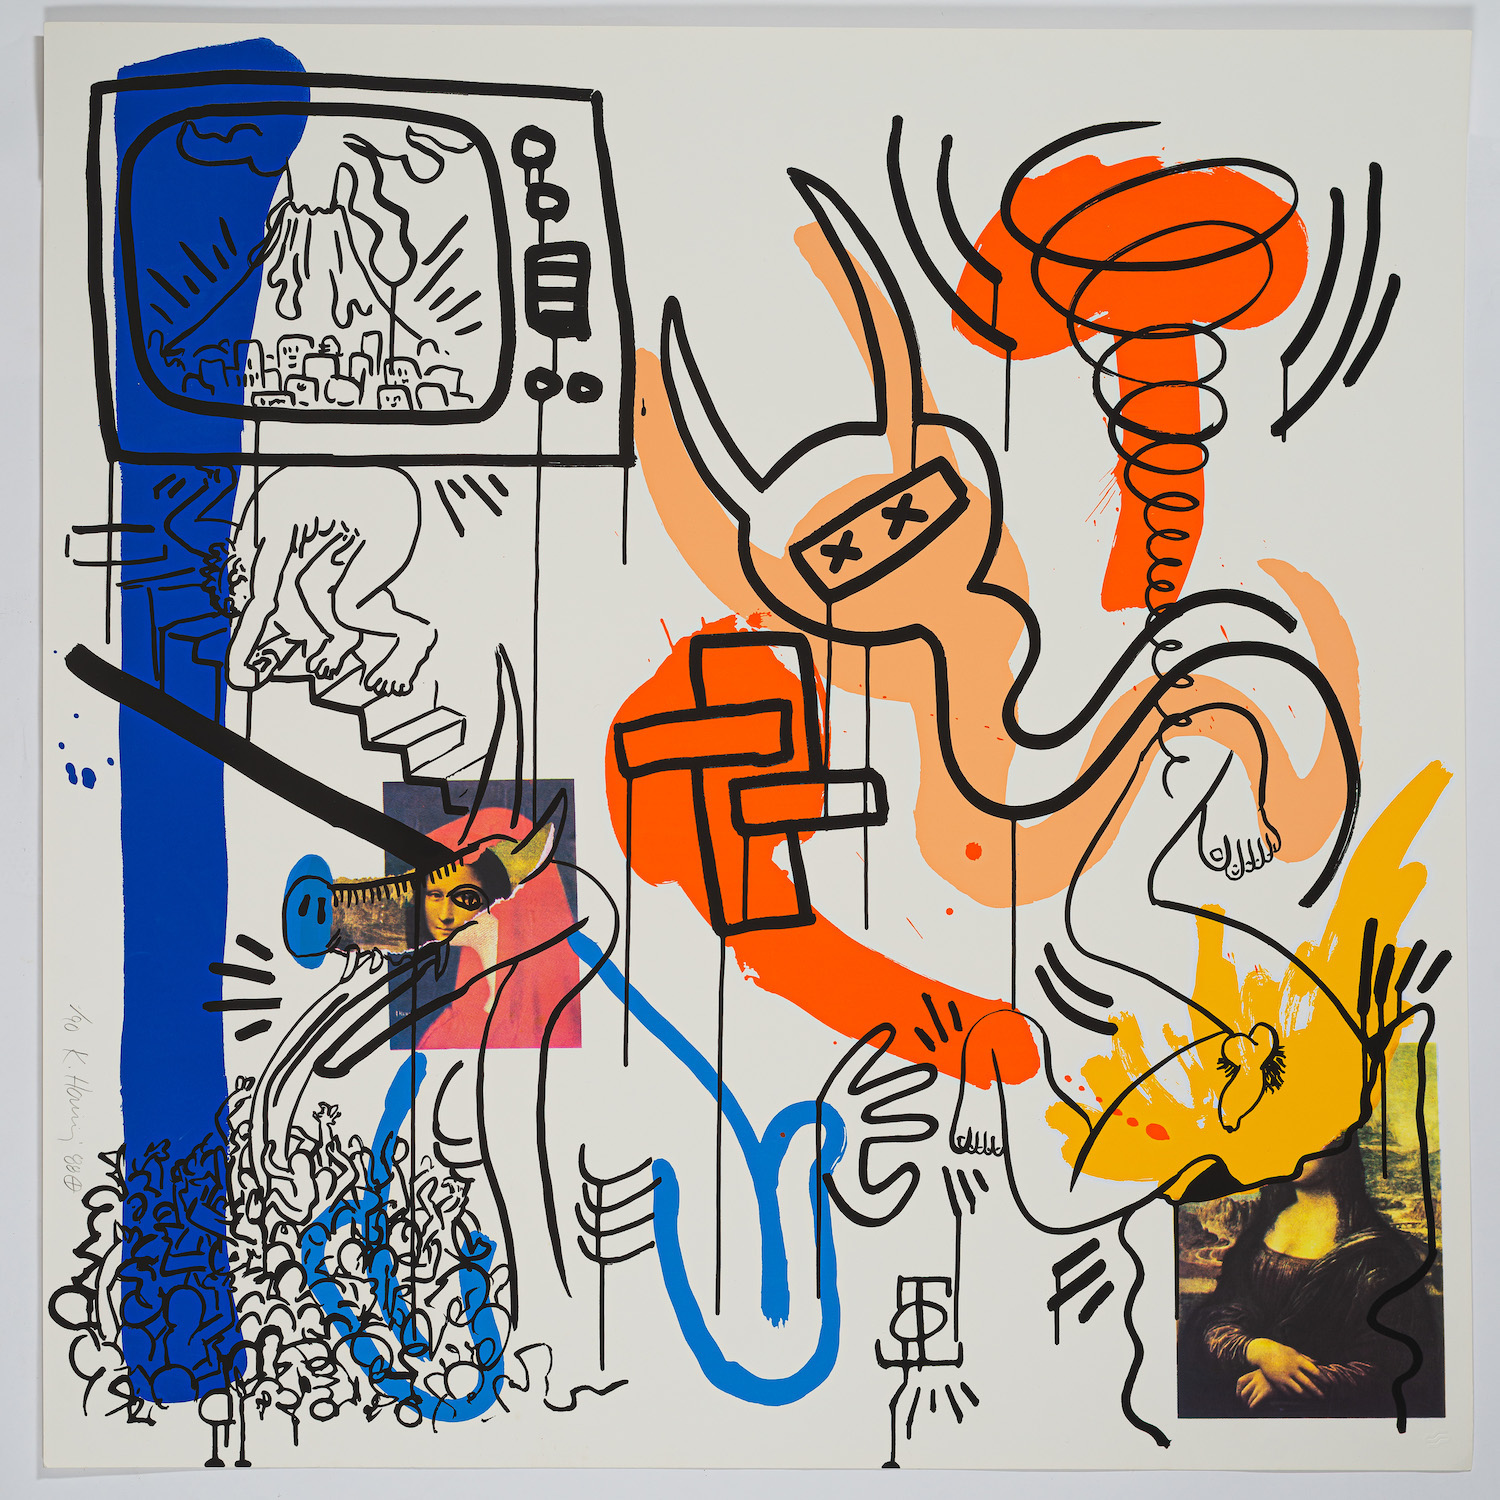 Apocalypse 7 by Keith Haring, out of the frame.